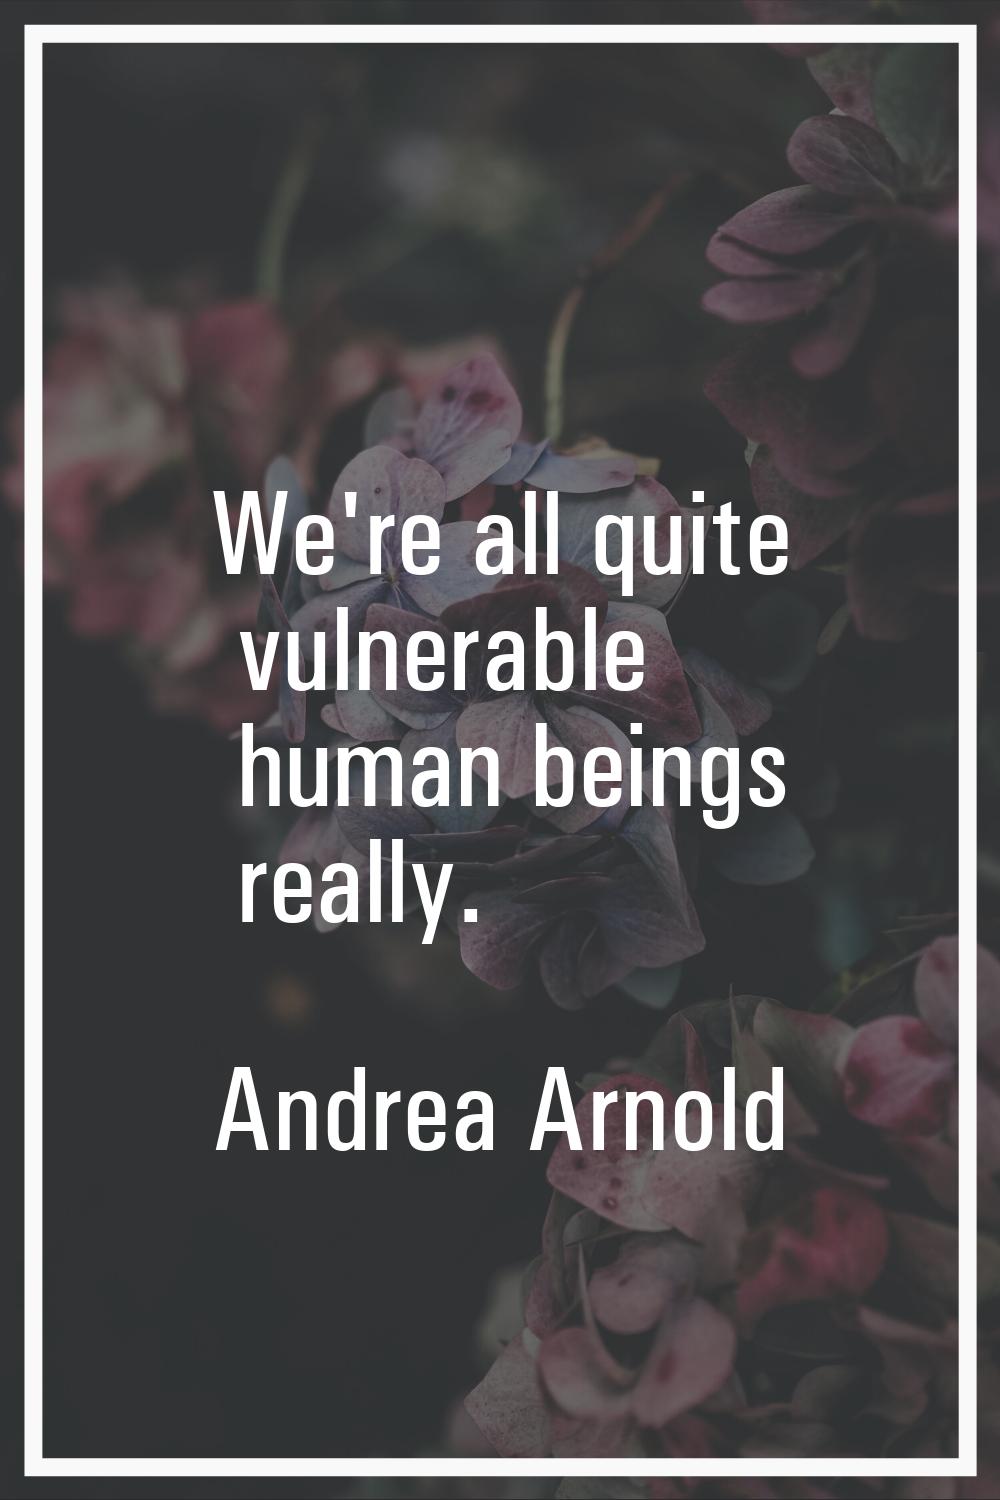 We're all quite vulnerable human beings really.